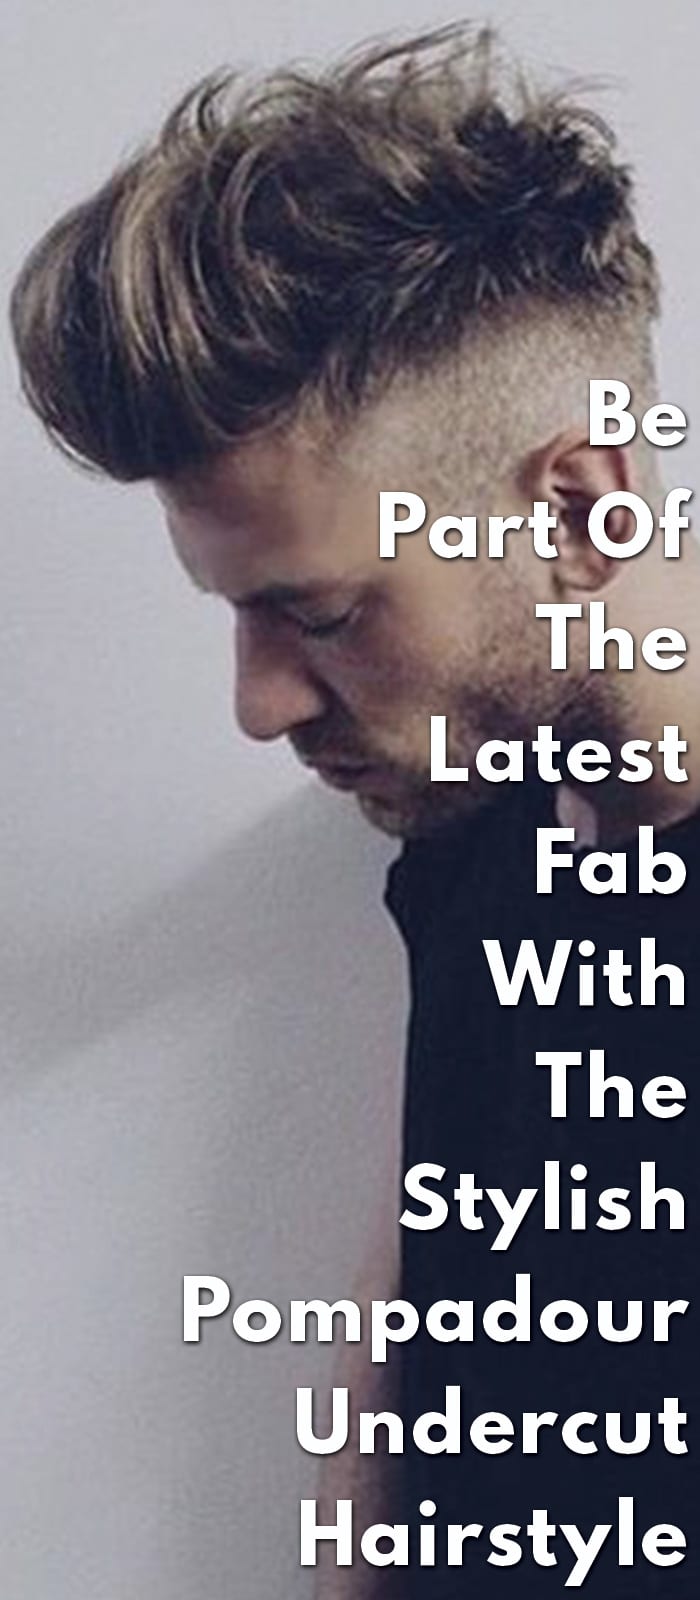 The Latest Fab - The Pompadour Undercut Hairstyle